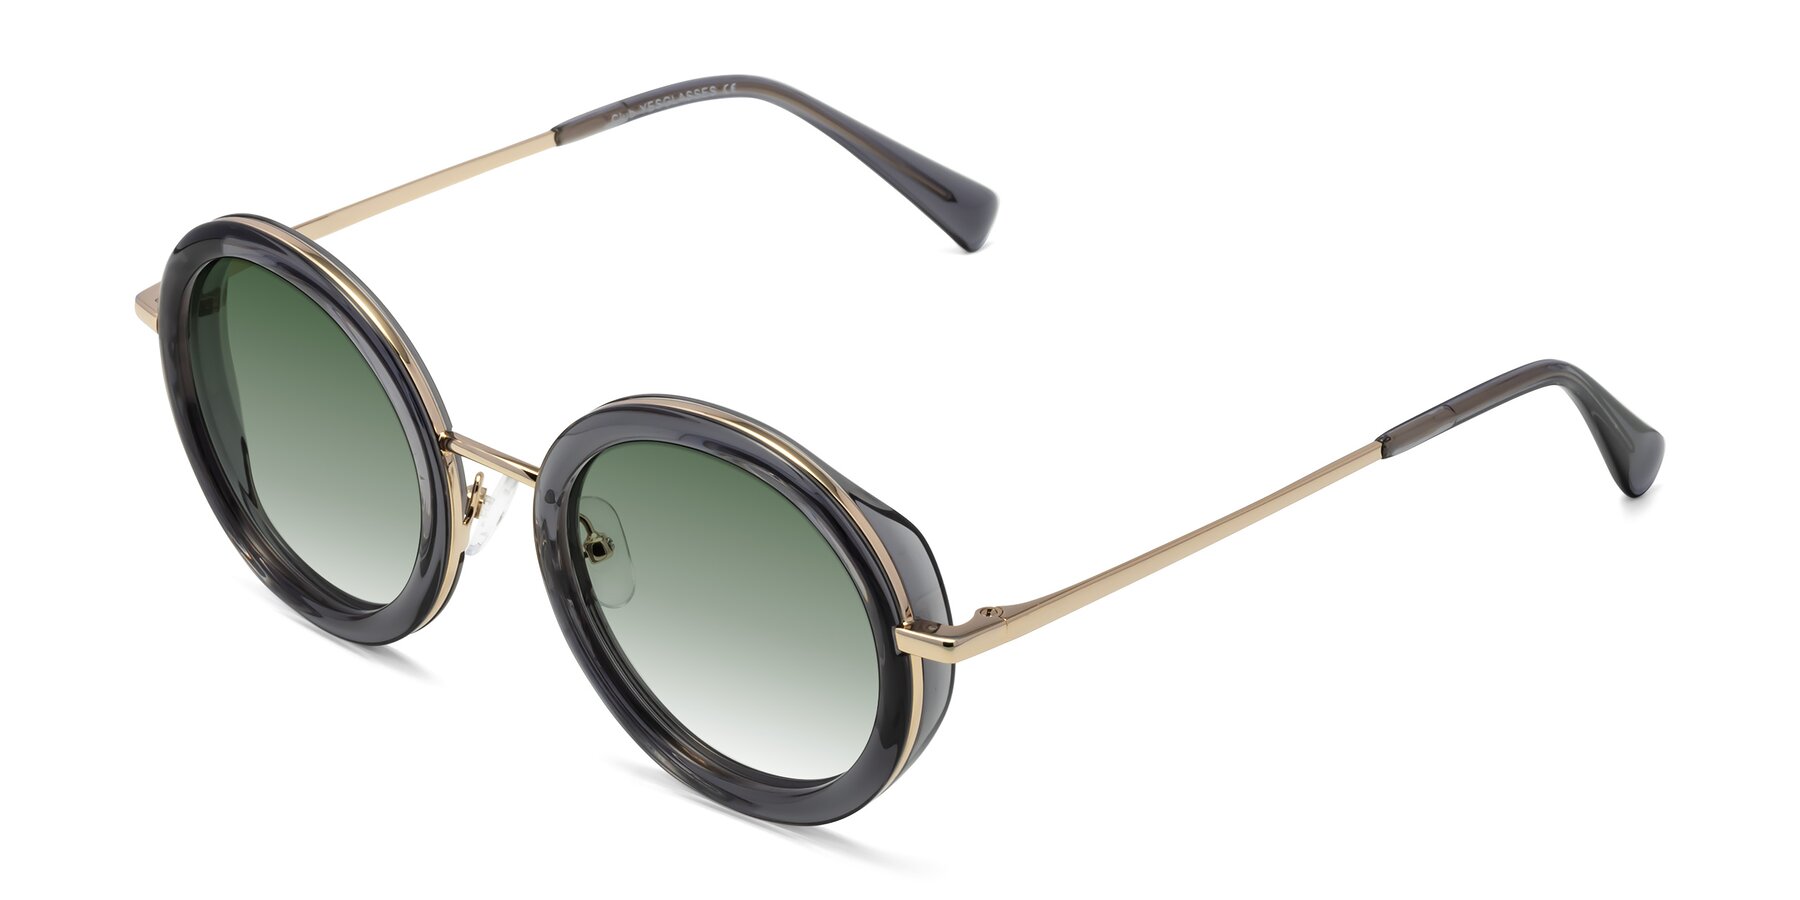 Angle of Club in Gray-Gold with Green Gradient Lenses